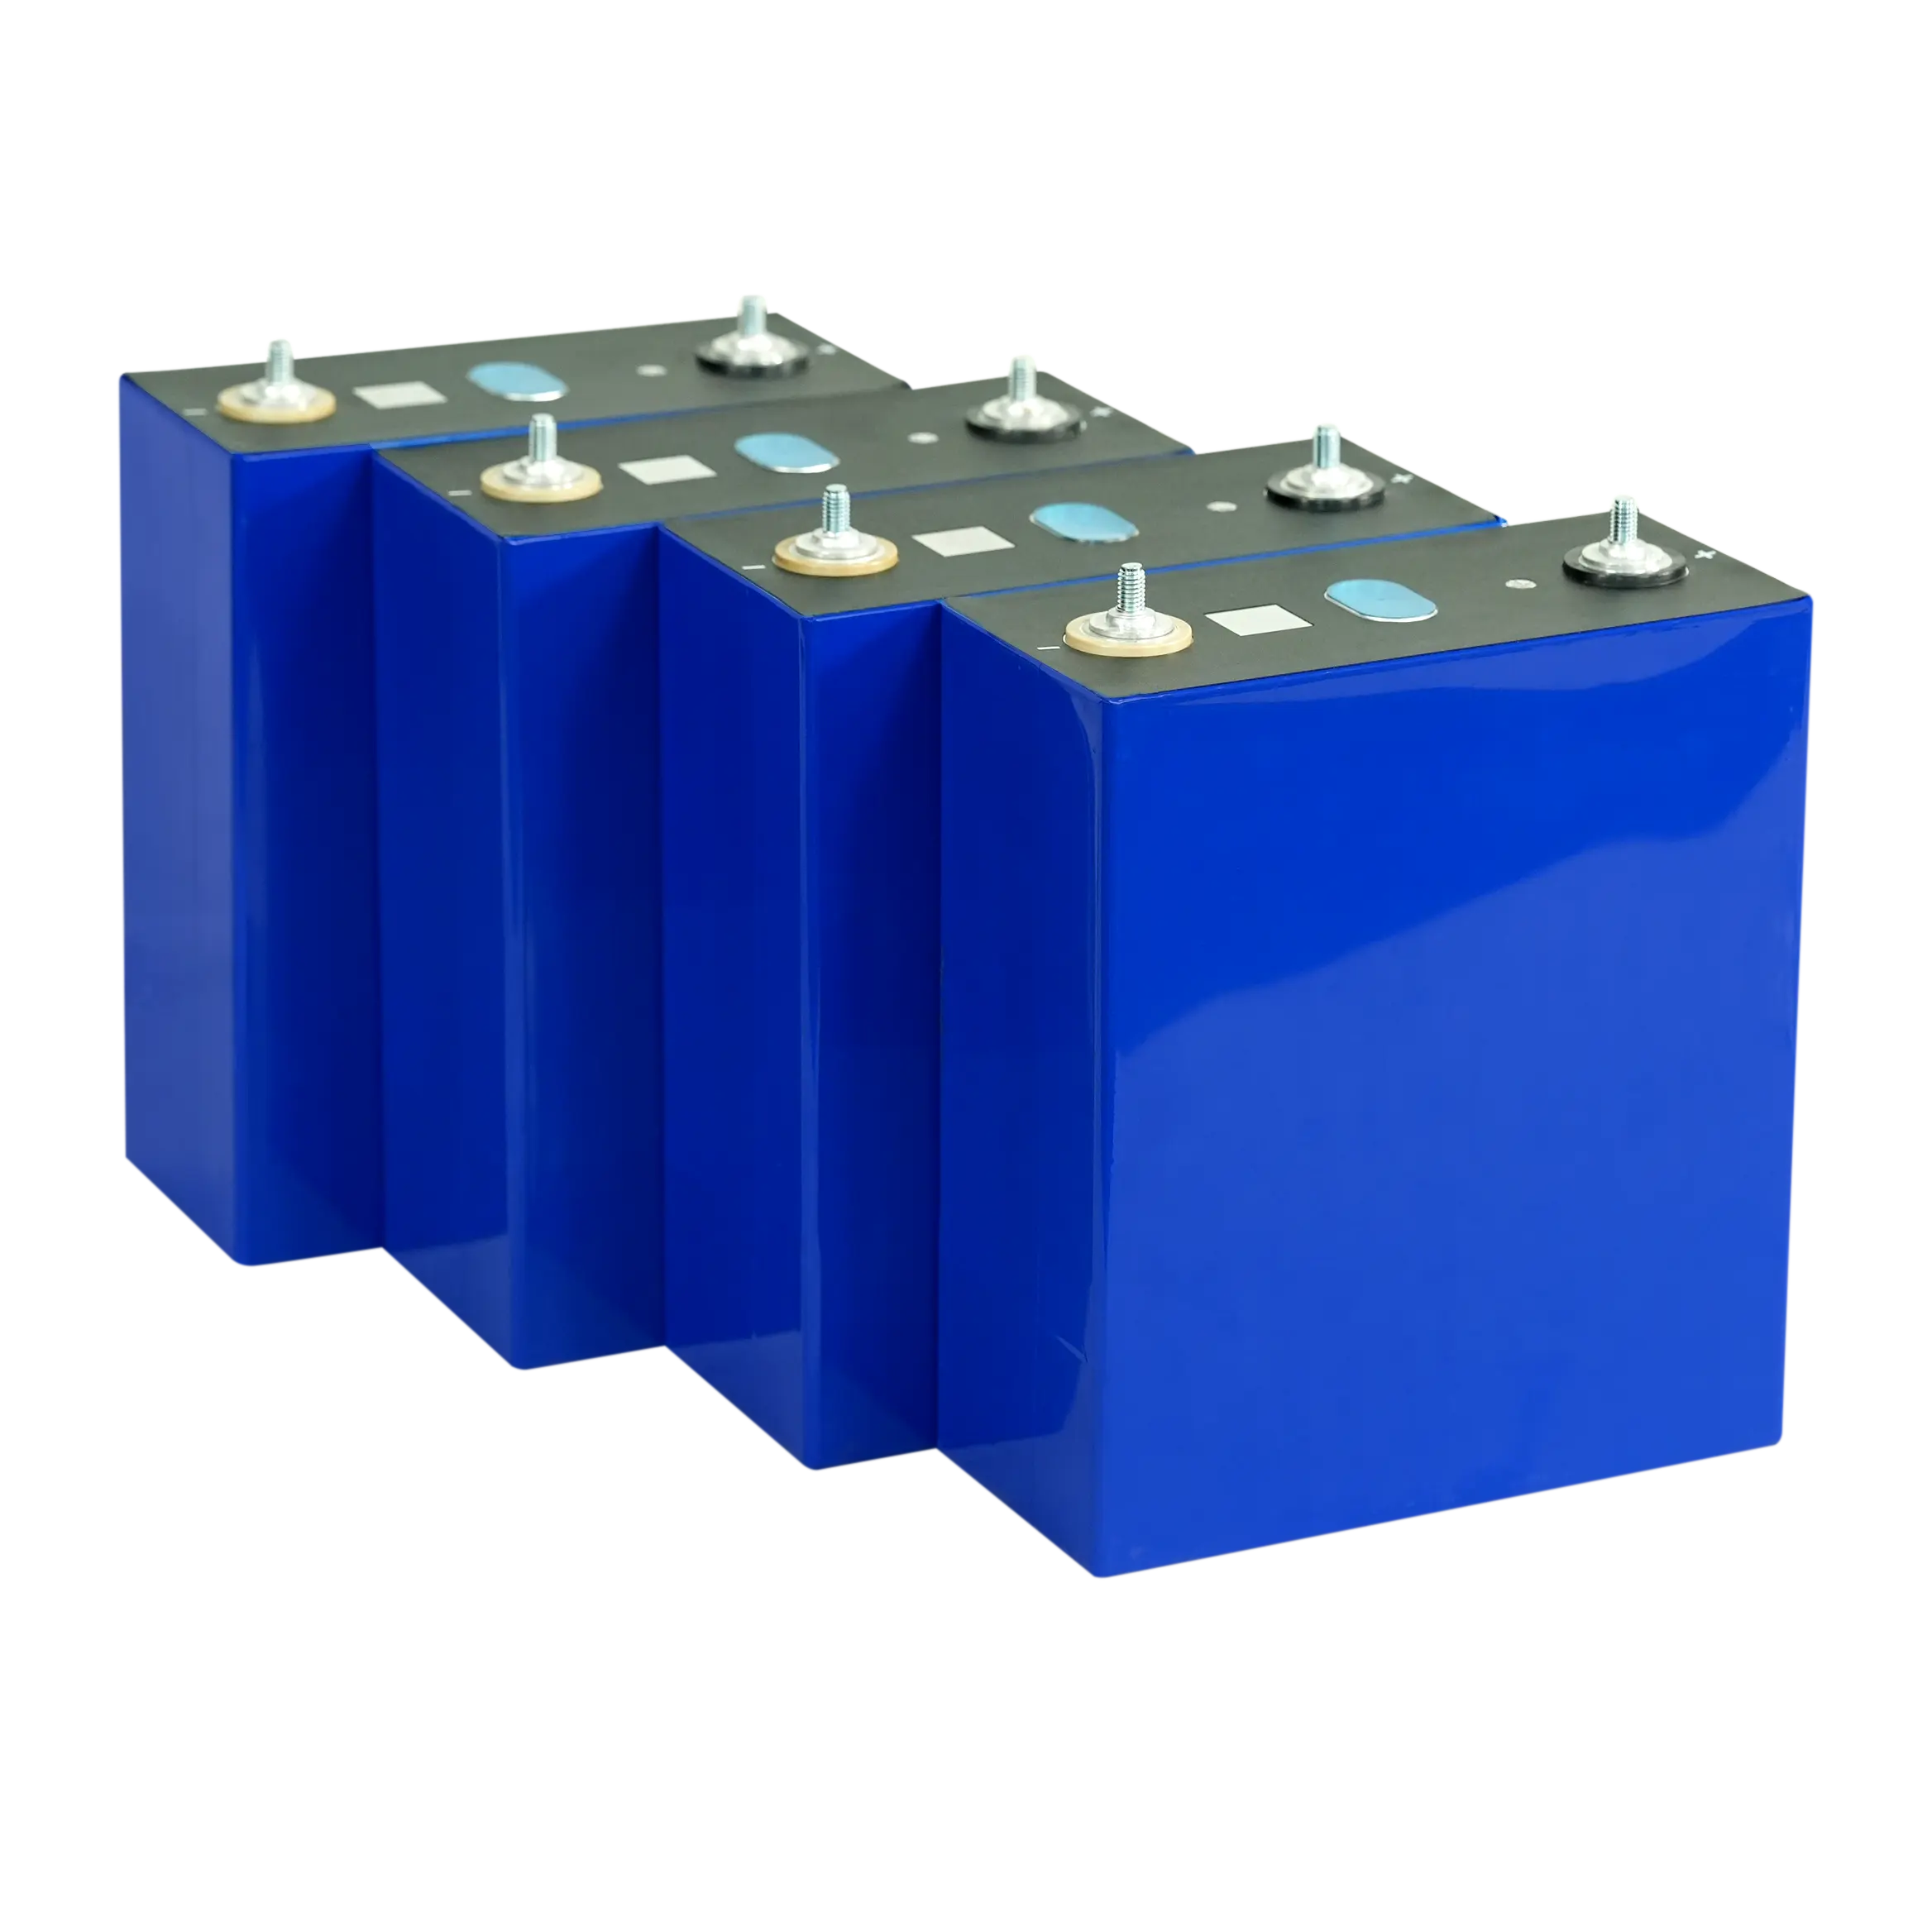 Batteries 100ah Gotion 3.2v 340ah Lifepo4 Battery 6000 Cycles Times Lithium Ion Battery For Solar Panel Energy Storage